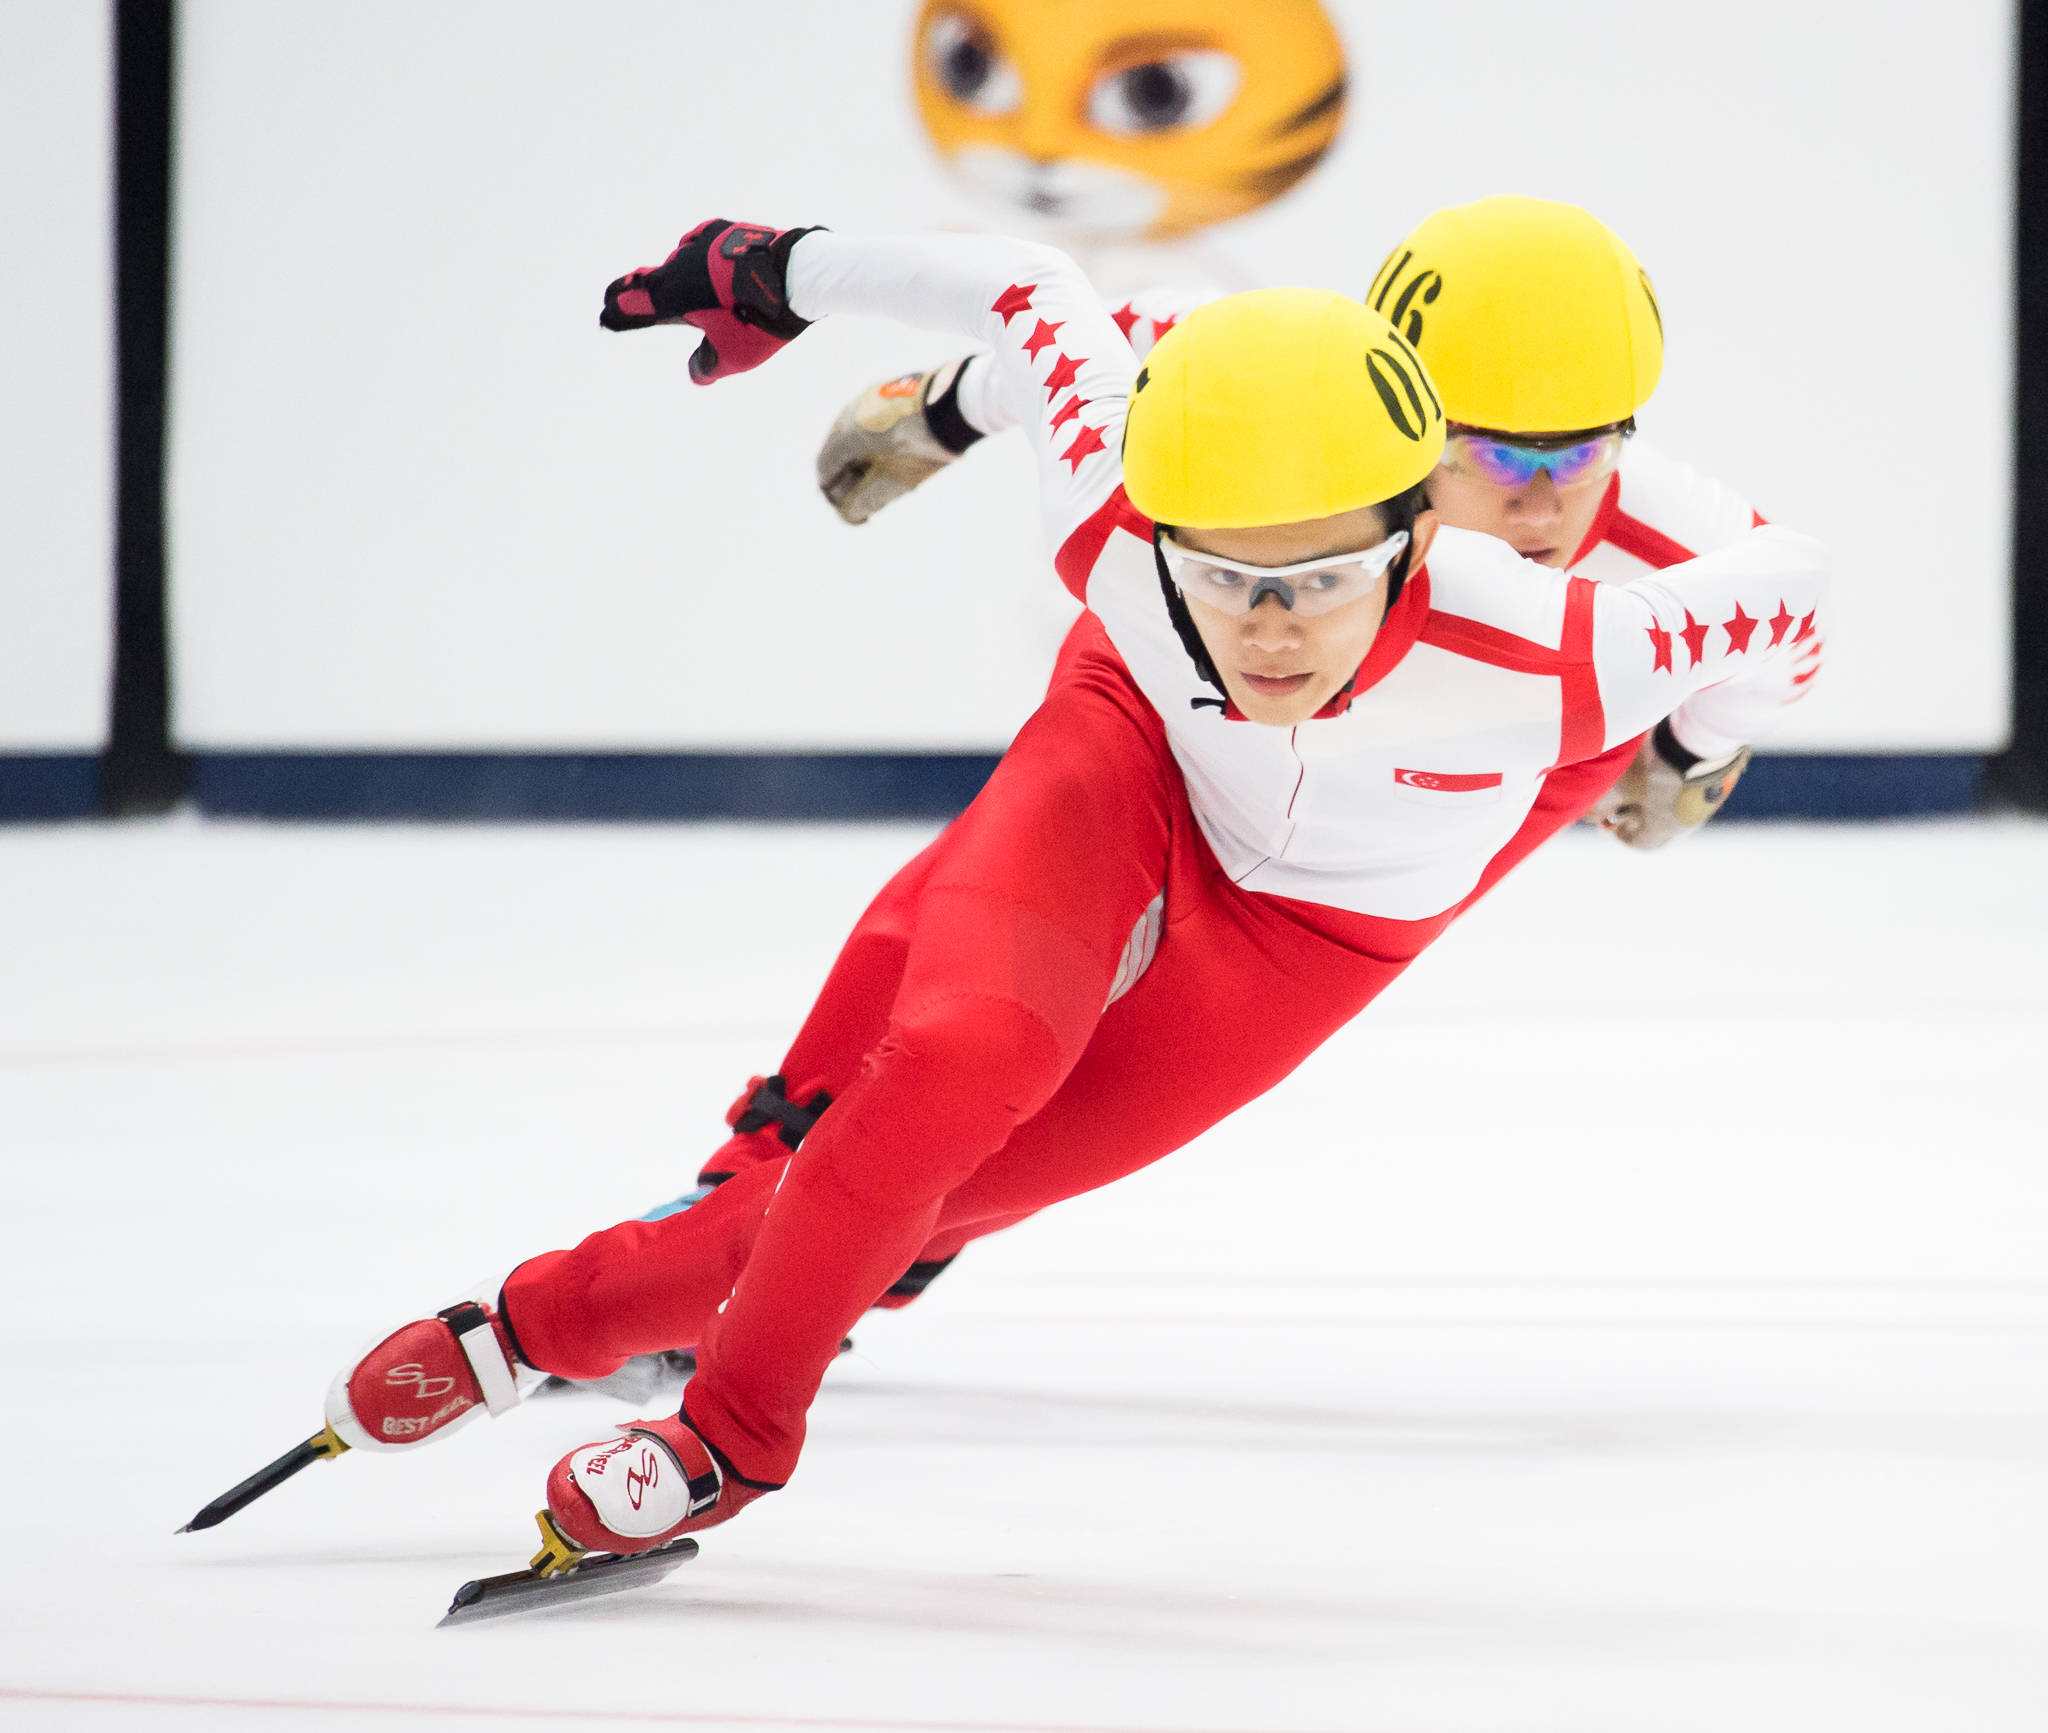 Two Singaporean speed skaters in action during the SEA Games at the Empire City Skating Rink.